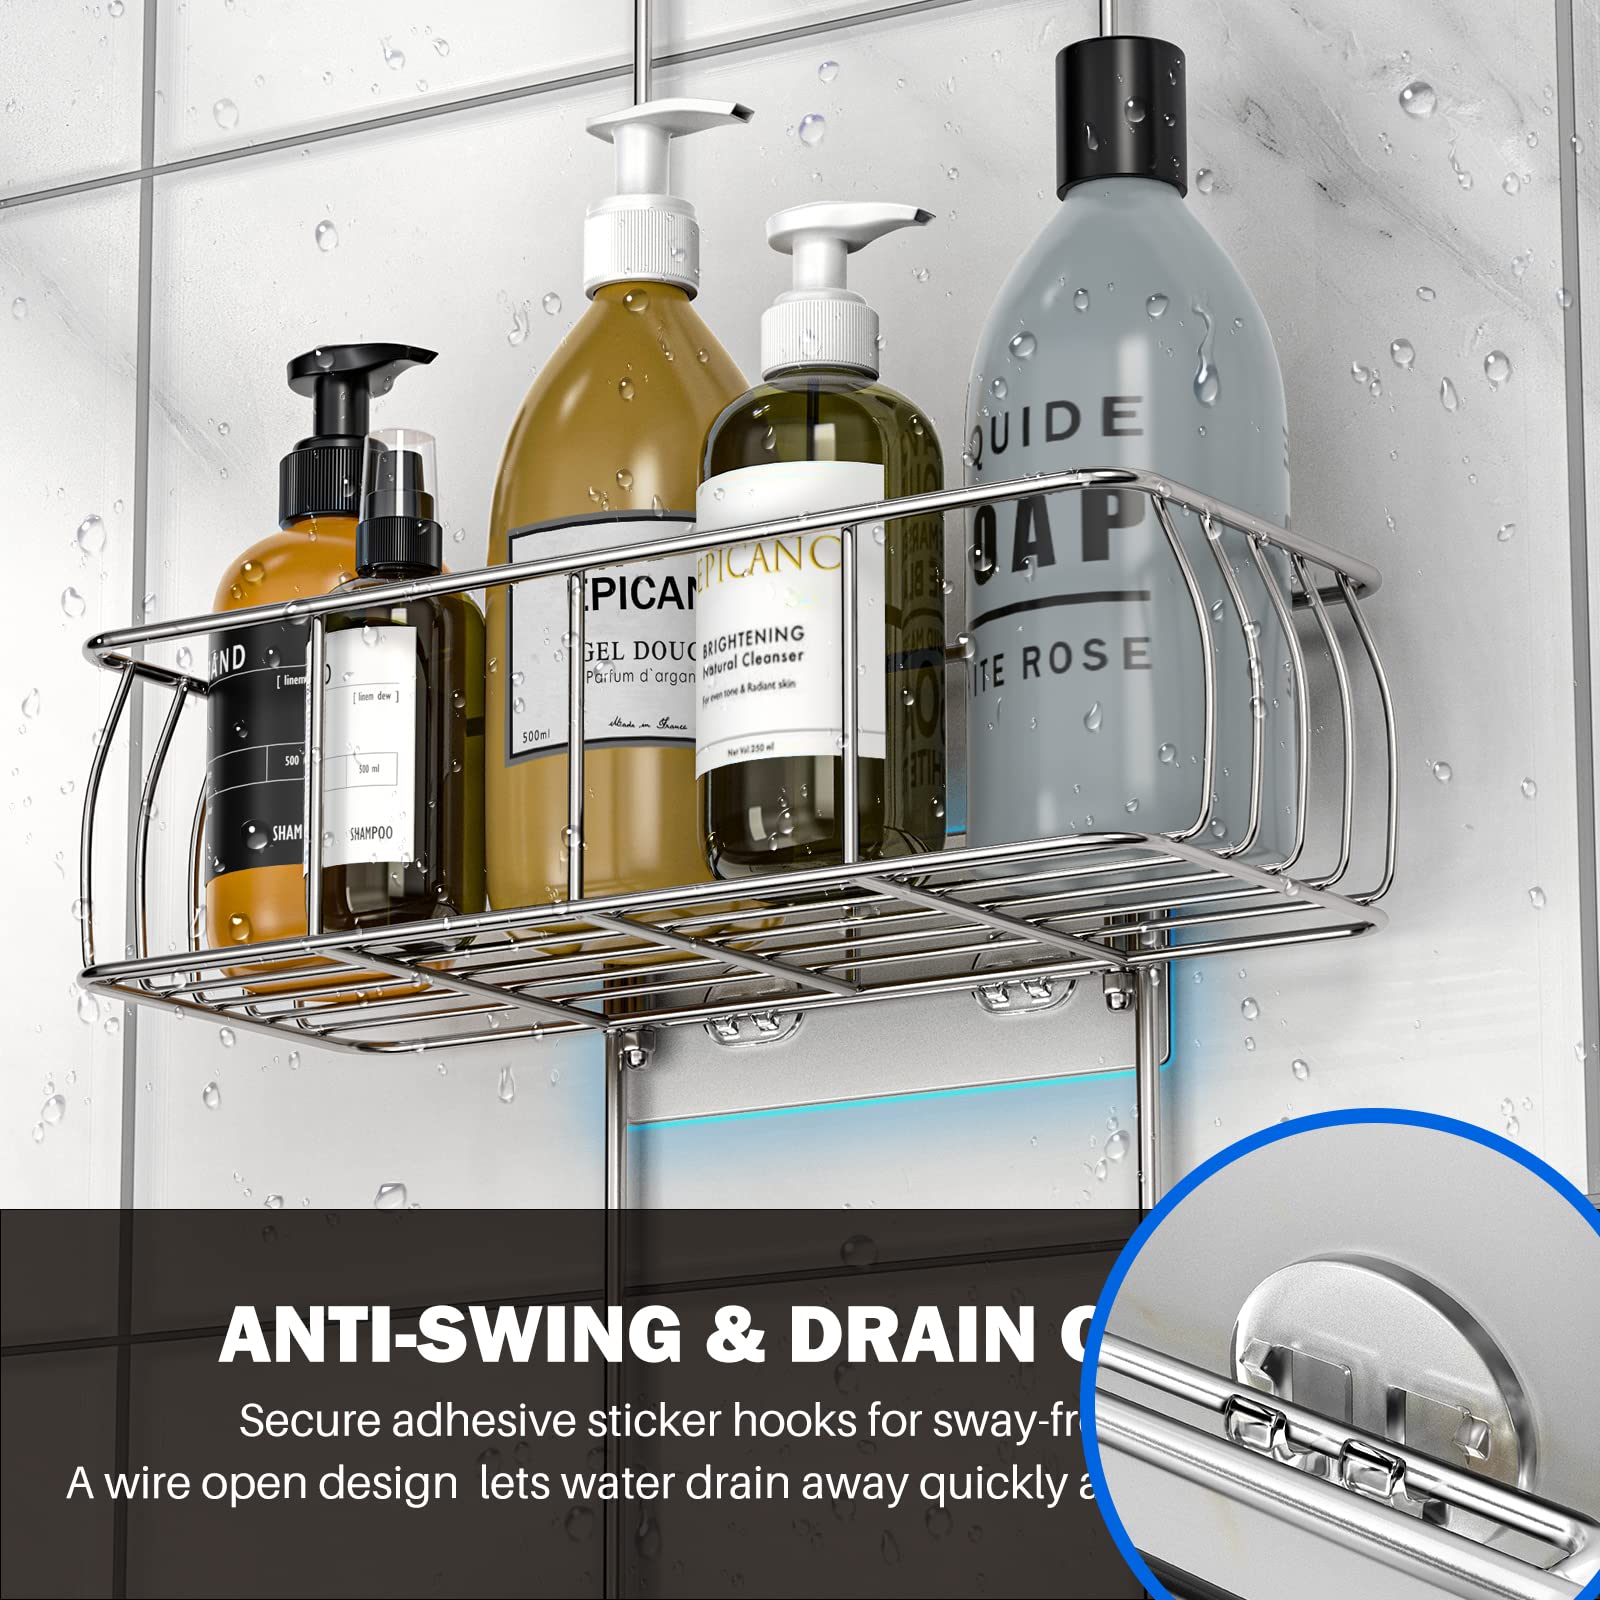 Epicano Anti-Swing Hanging Shower Caddy Stainless Steel 304, Over Head Shower Caddy Rustproof with hooks for Towels, Sponge and more, Chrome